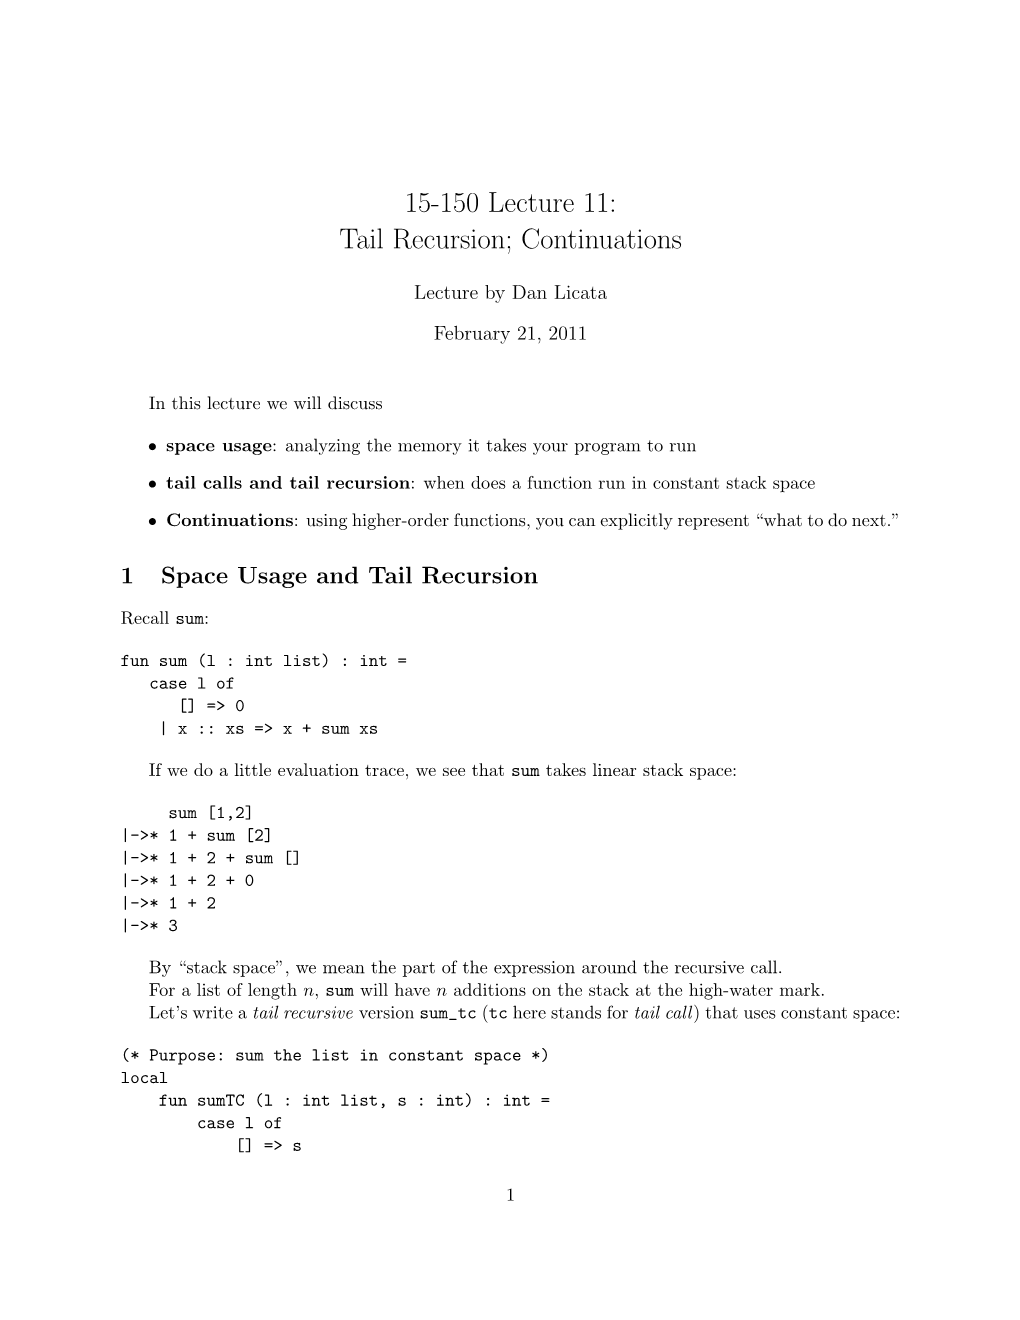 15-150 Lecture 11: Tail Recursion; Continuations